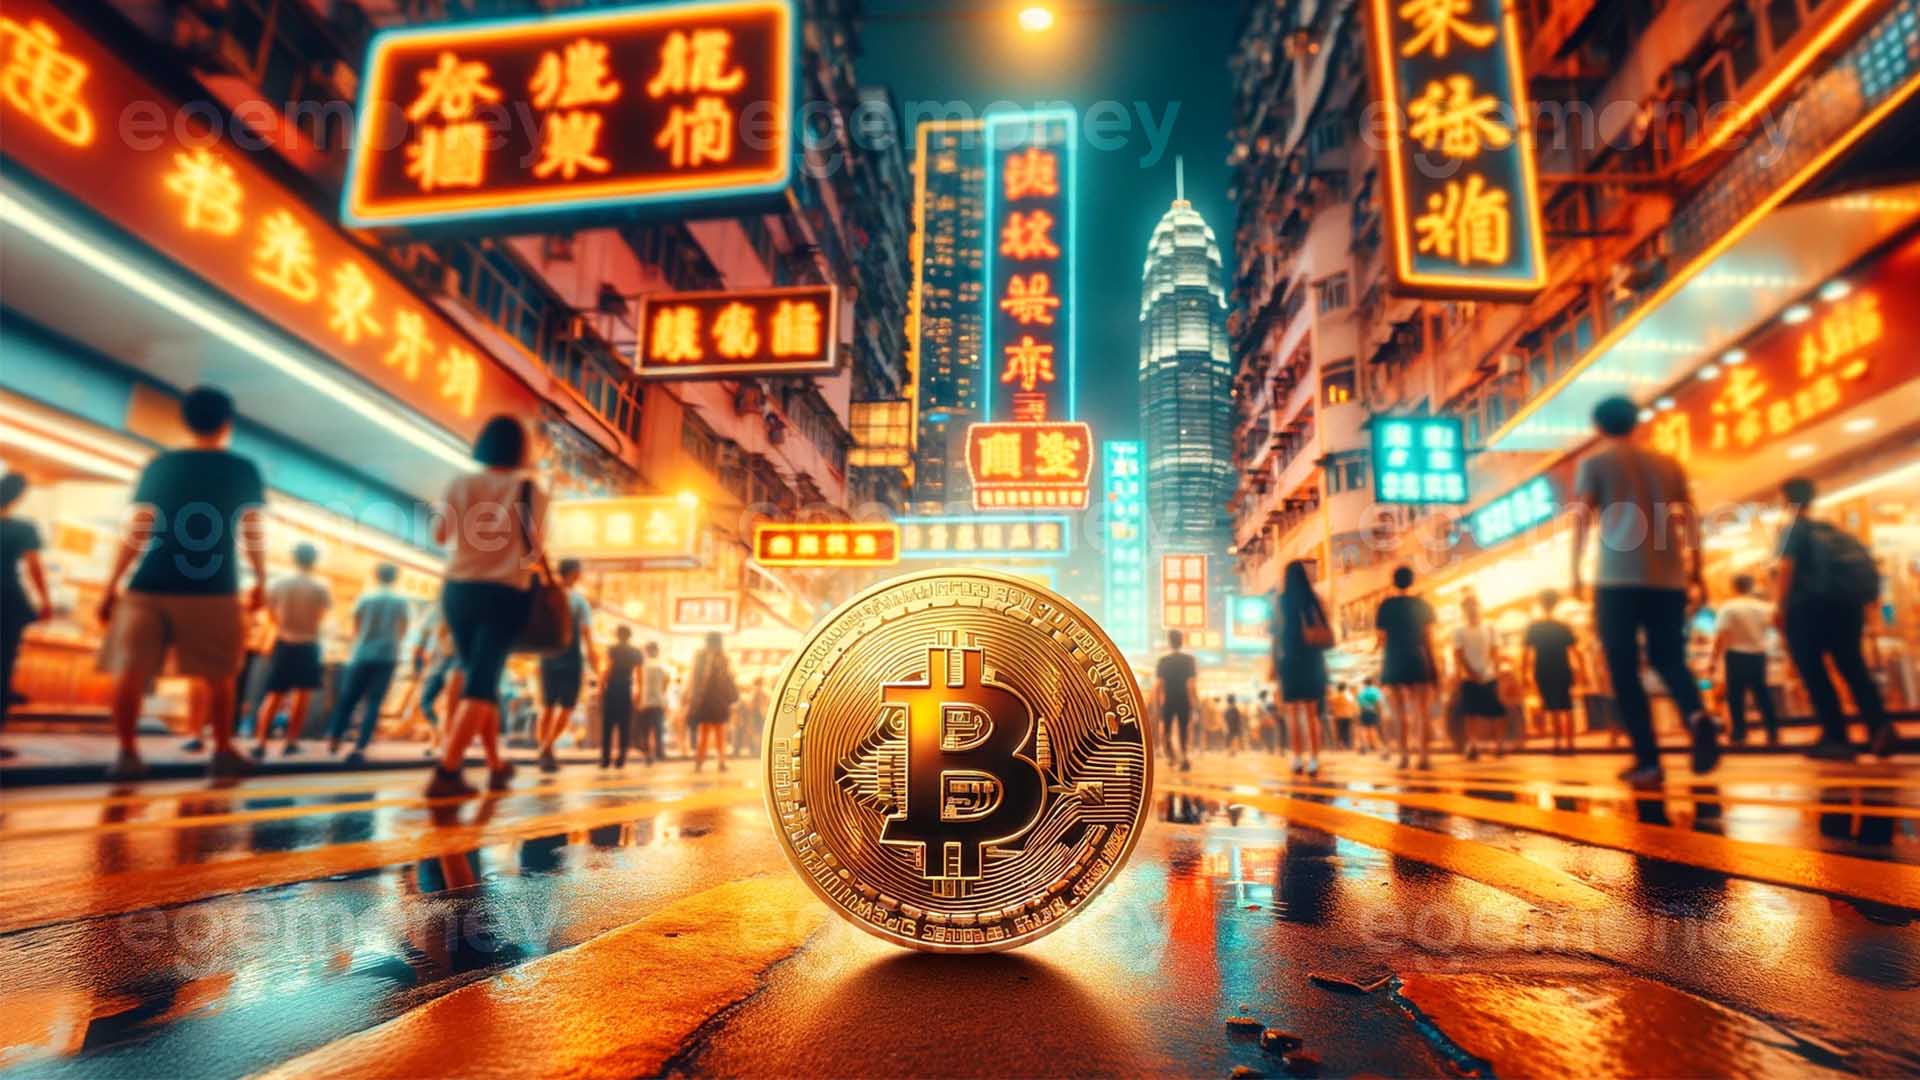 Bitcoin ETFs Expected to be Launched in Hong Kong